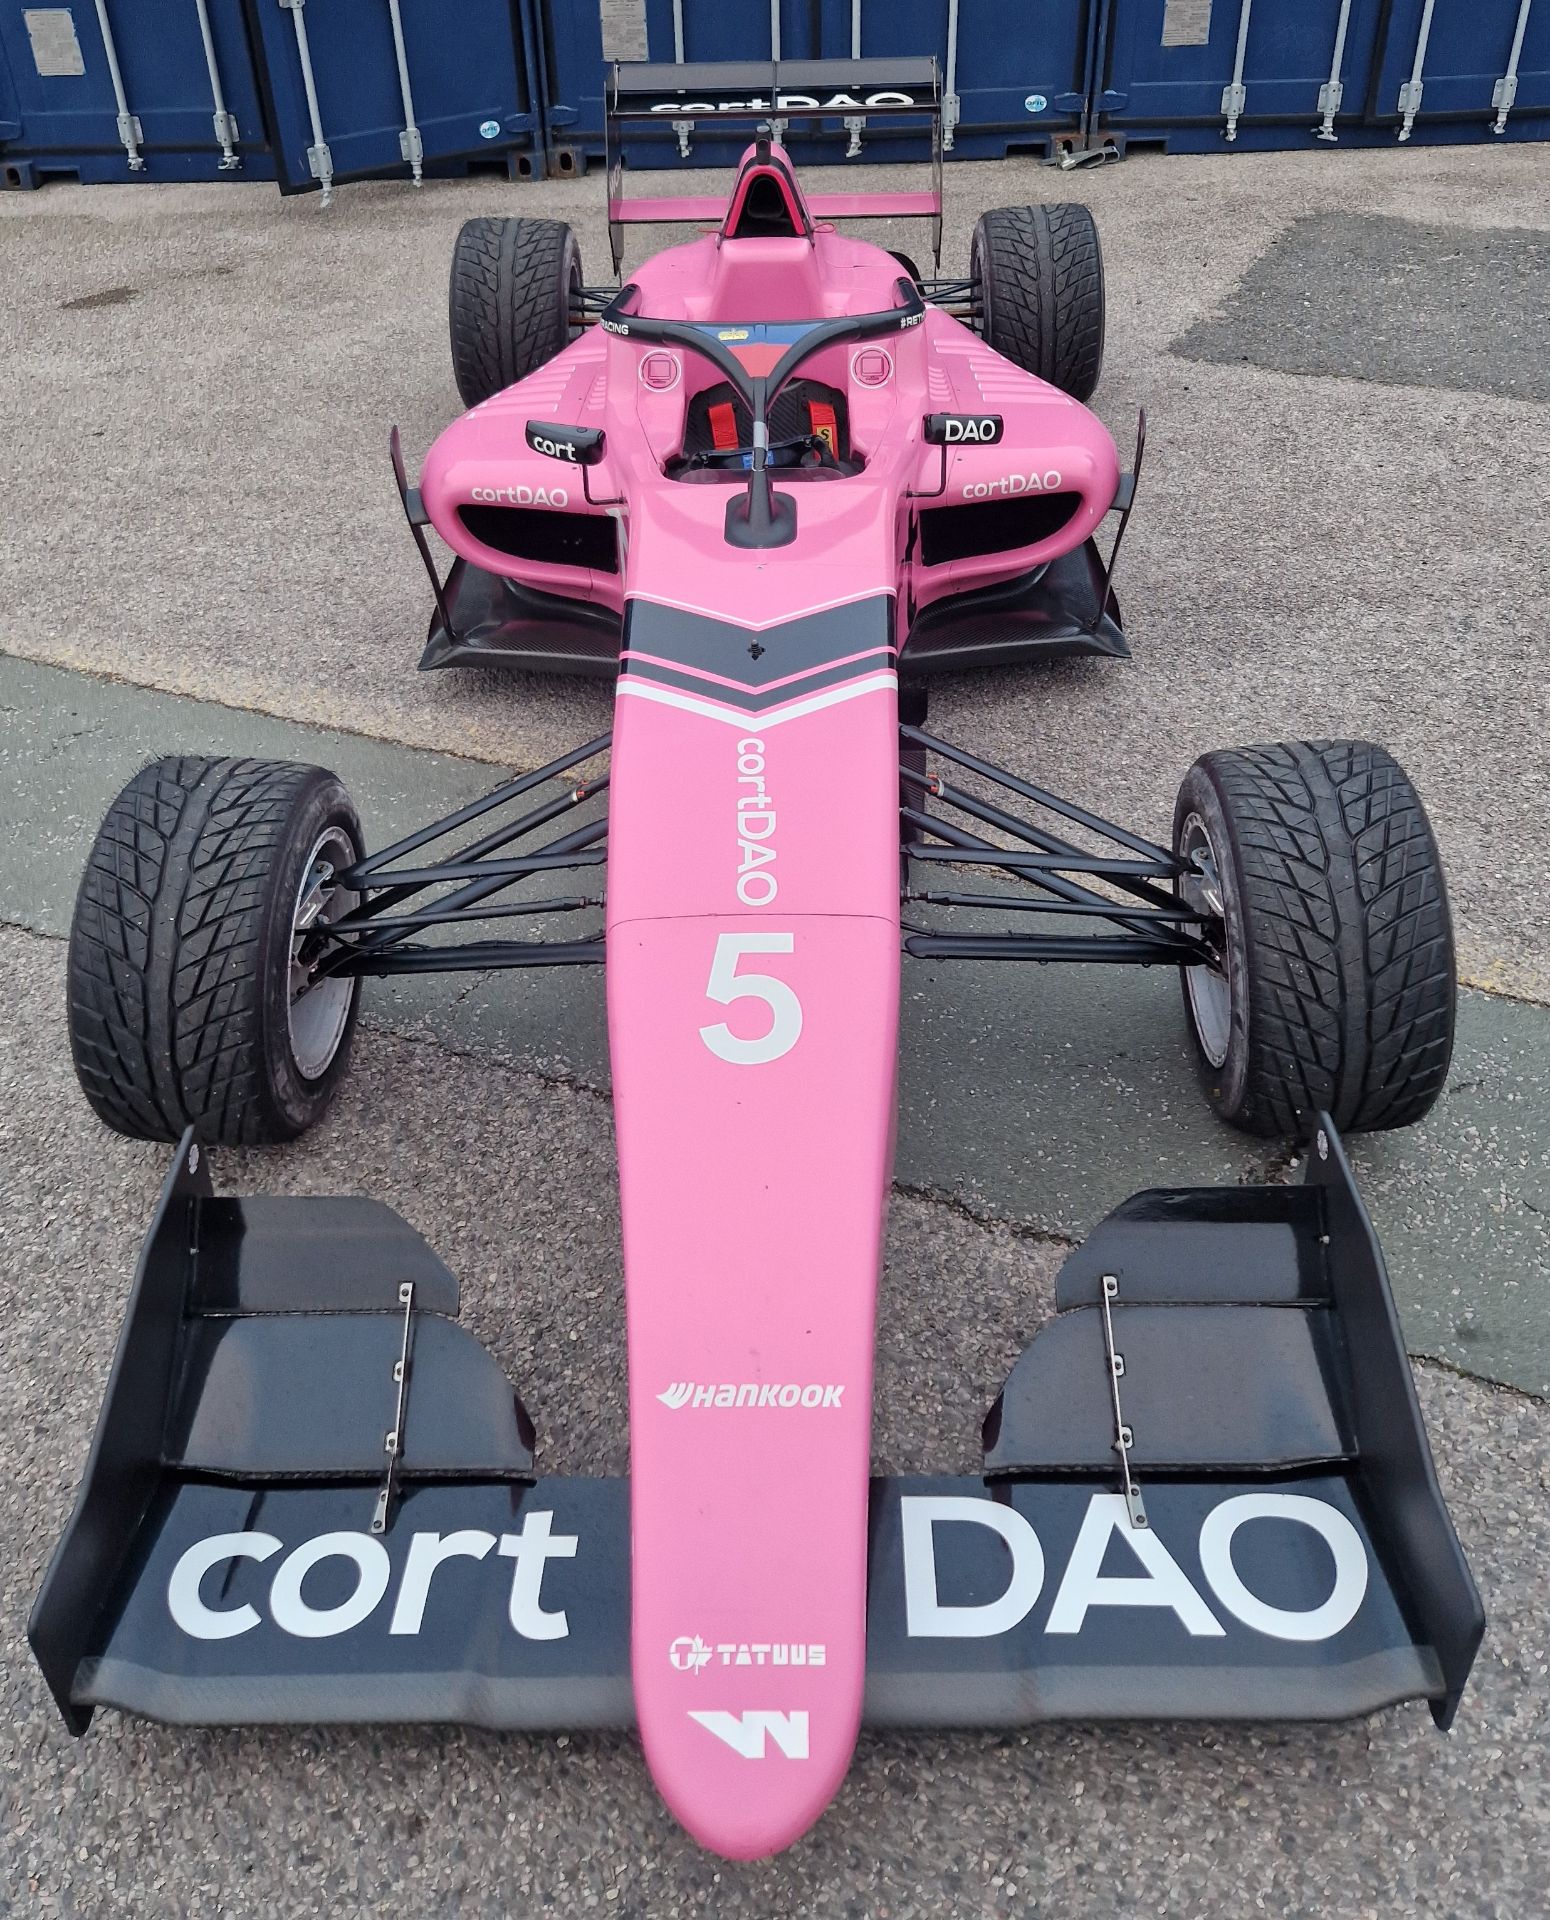 One TATUUS F3 T-318 Alfa Romeo Race Car Chassis No. 082 (2019) Finished in cortDAO Livery as - Image 3 of 10